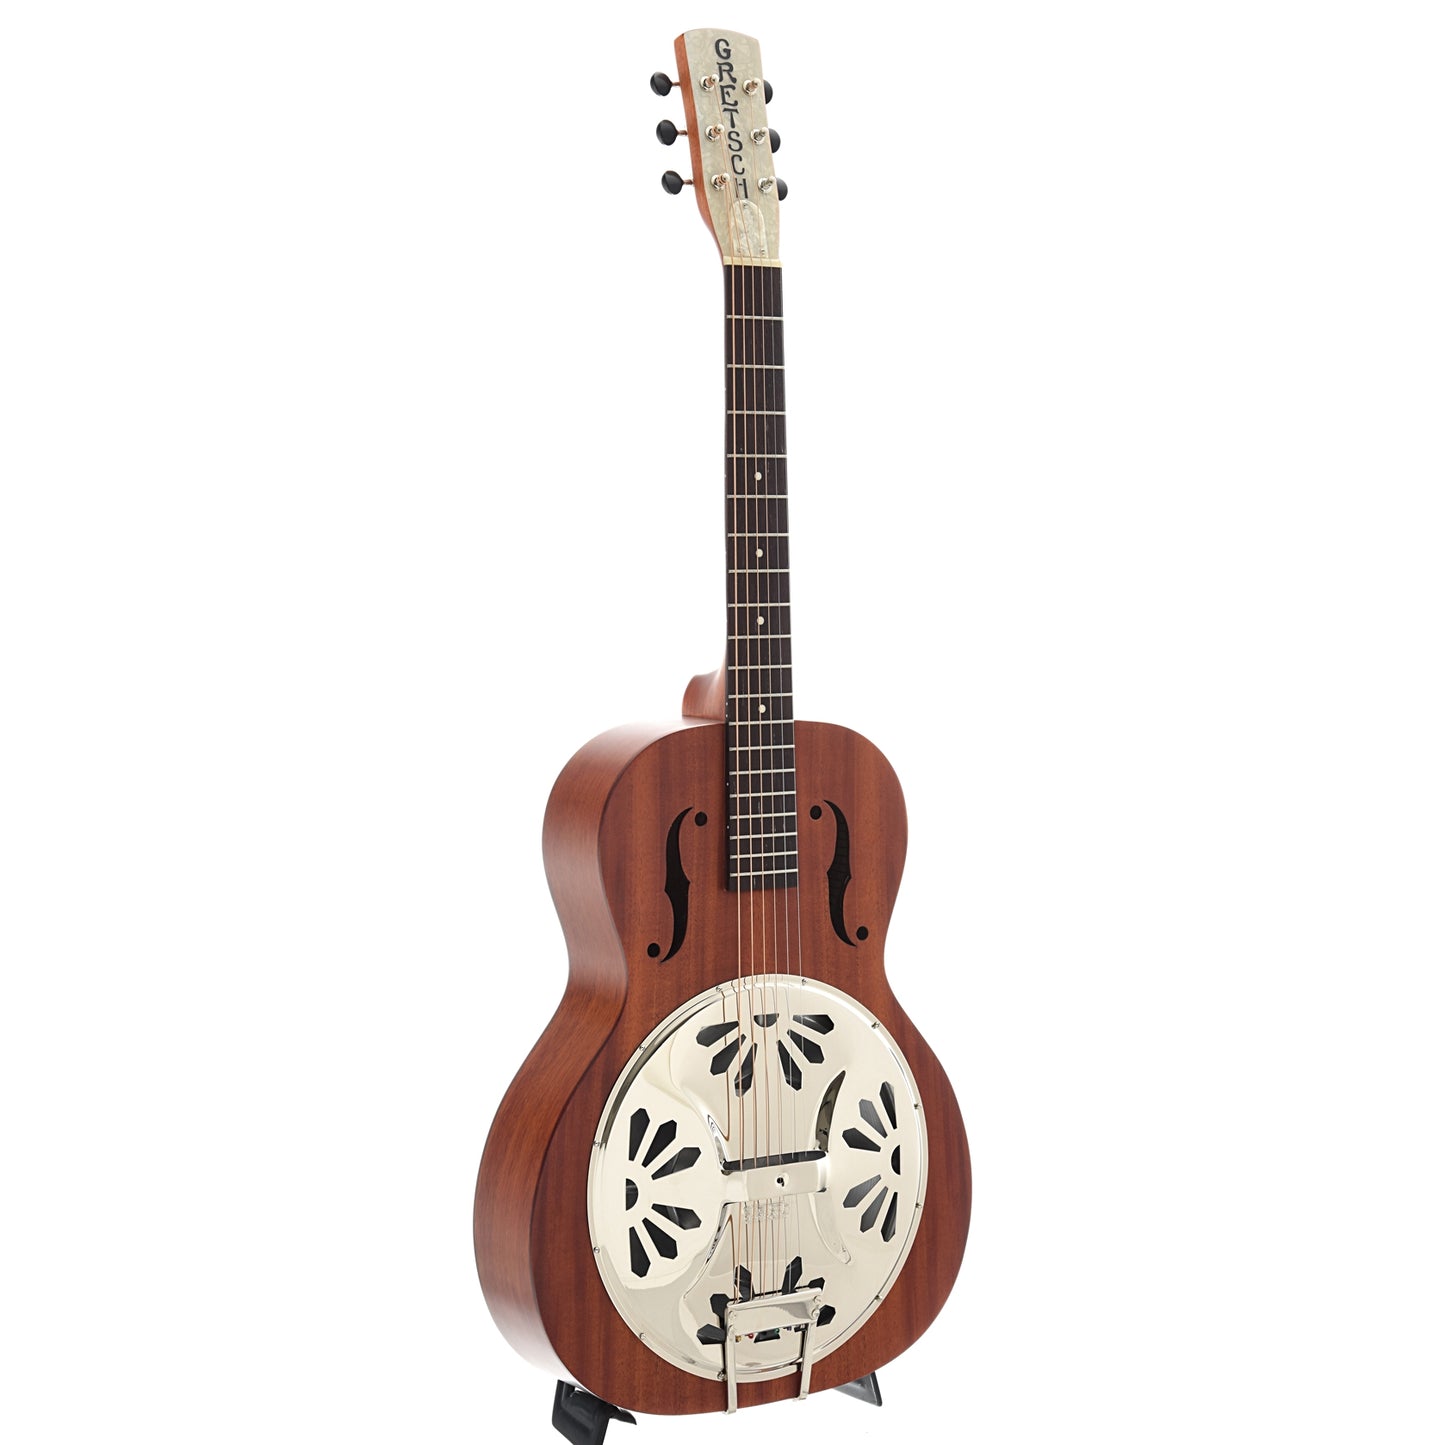 Full Front and Side of Gretsch Ampli-Sonic G9200 Boxcar Standard Roundneck Resonator Guitar